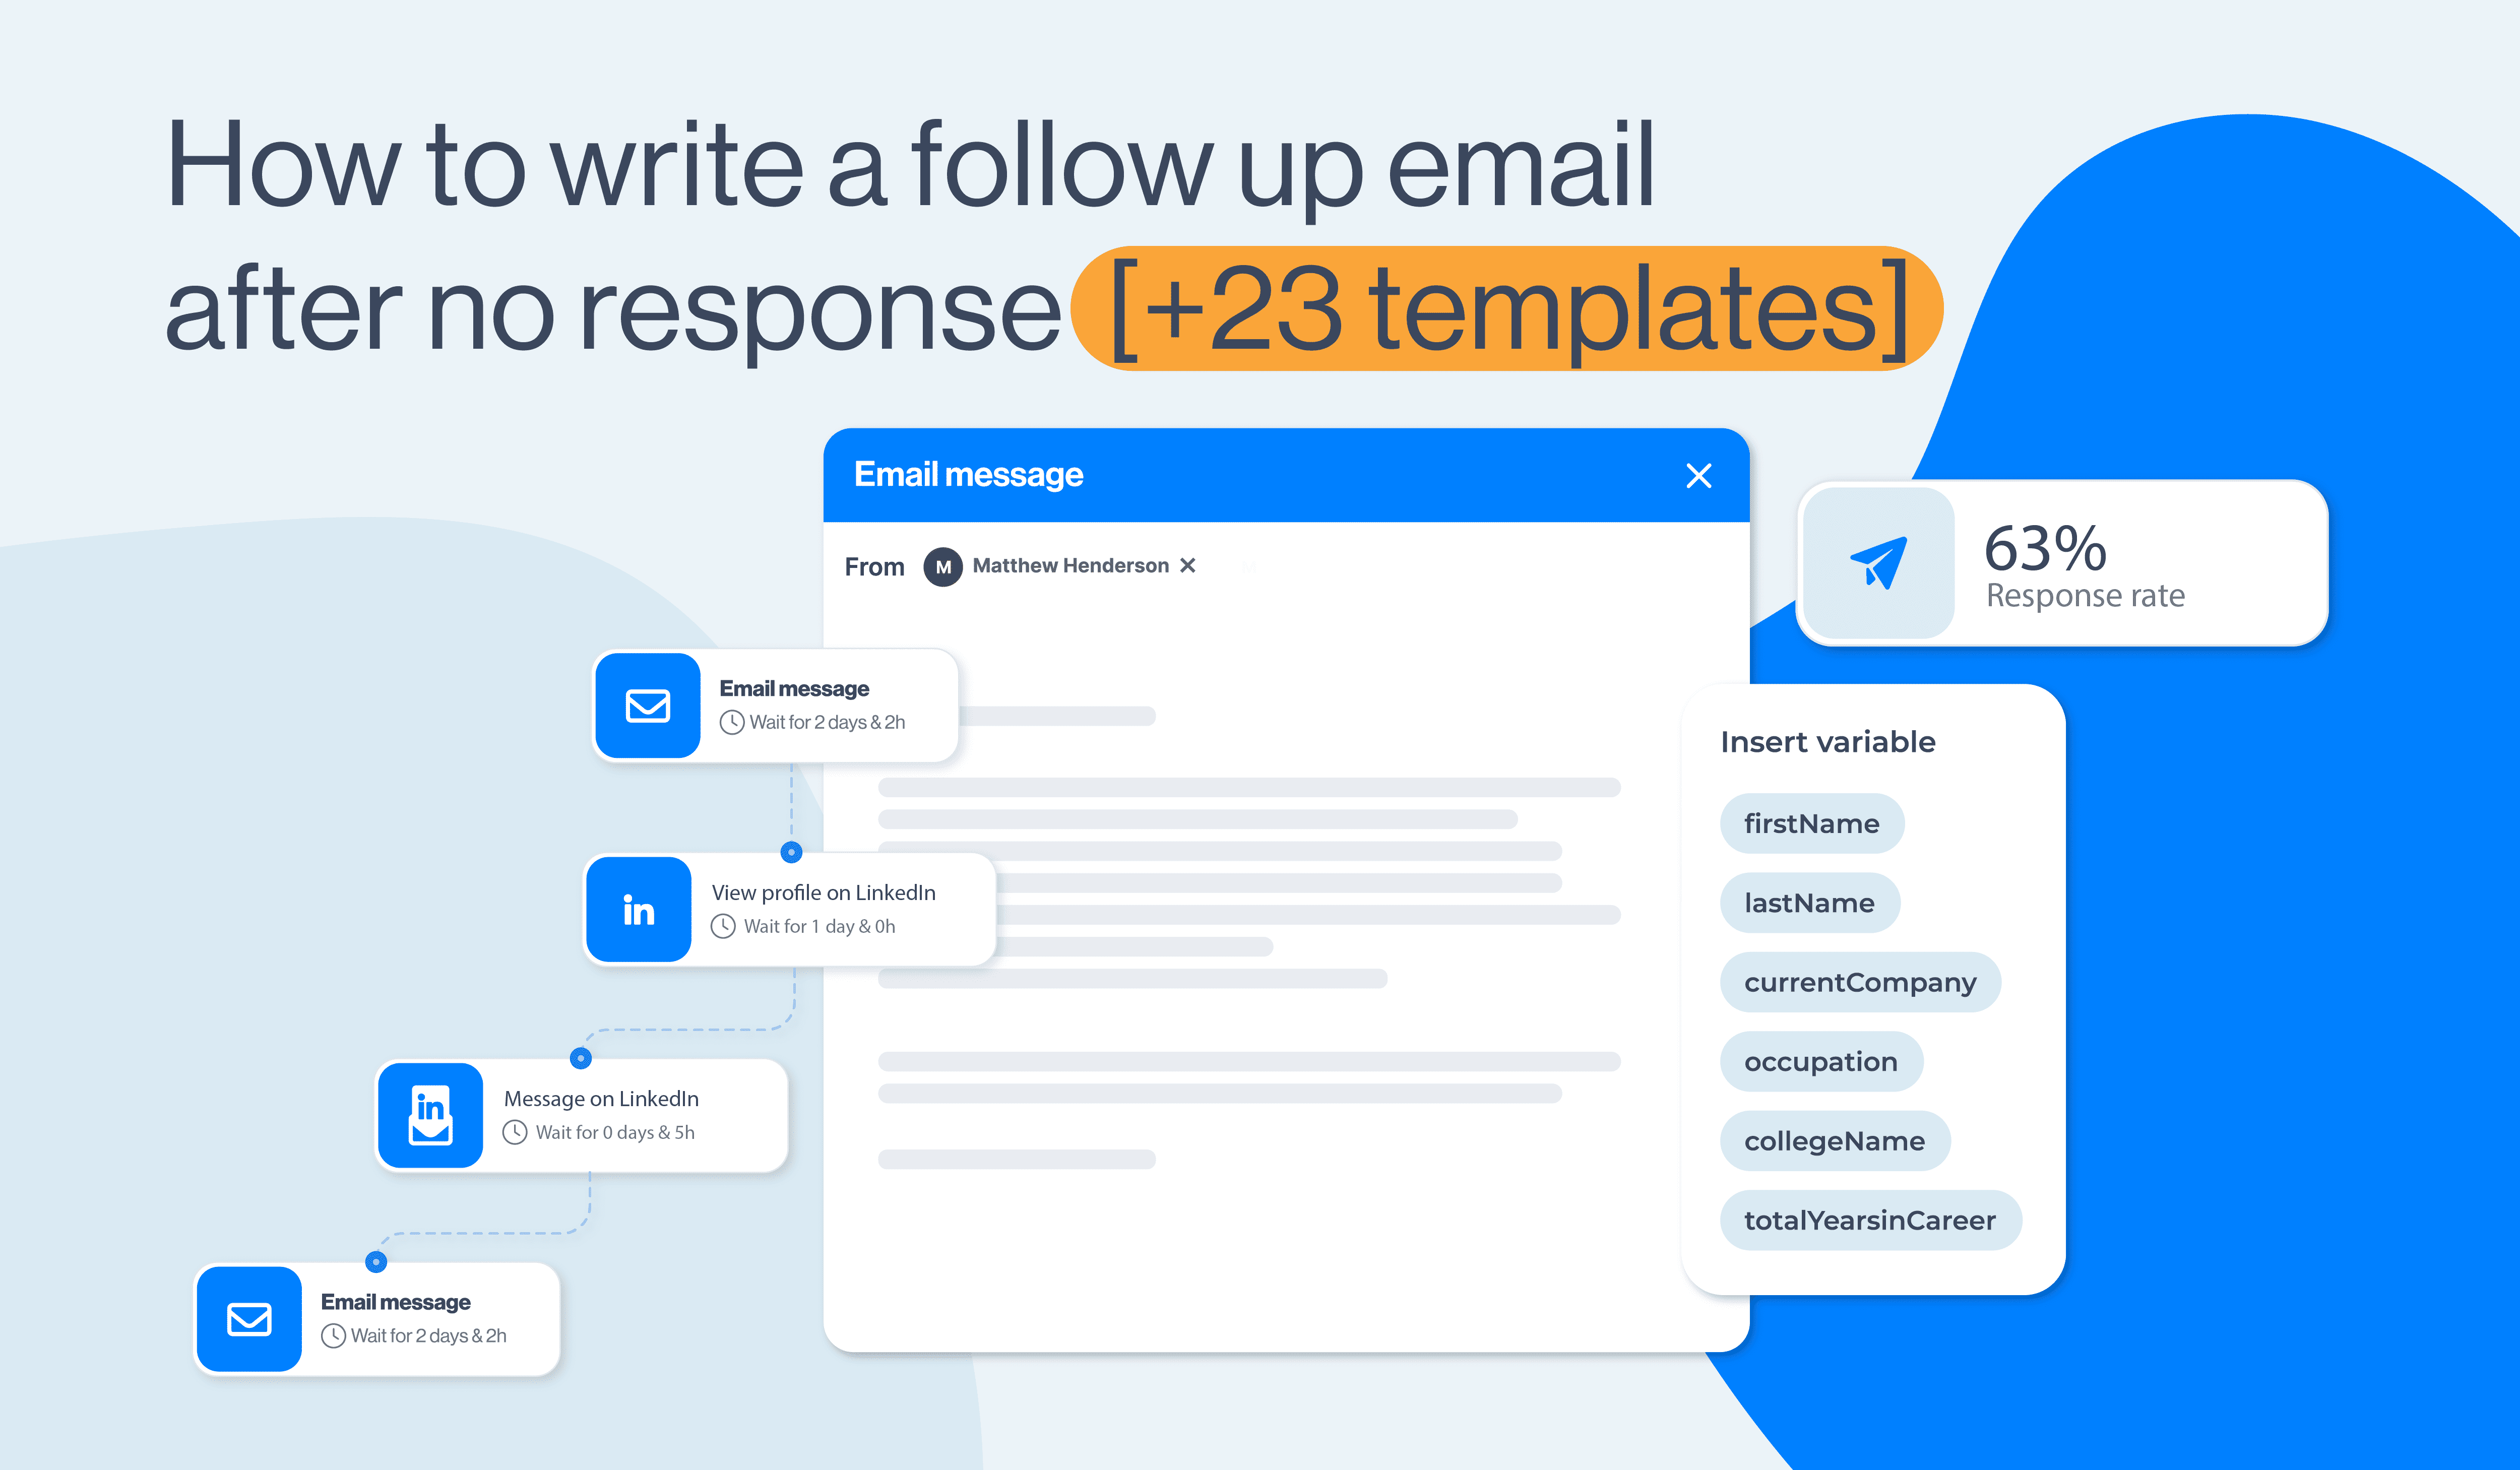 Follow Up Email Templates: How To Write & Examples